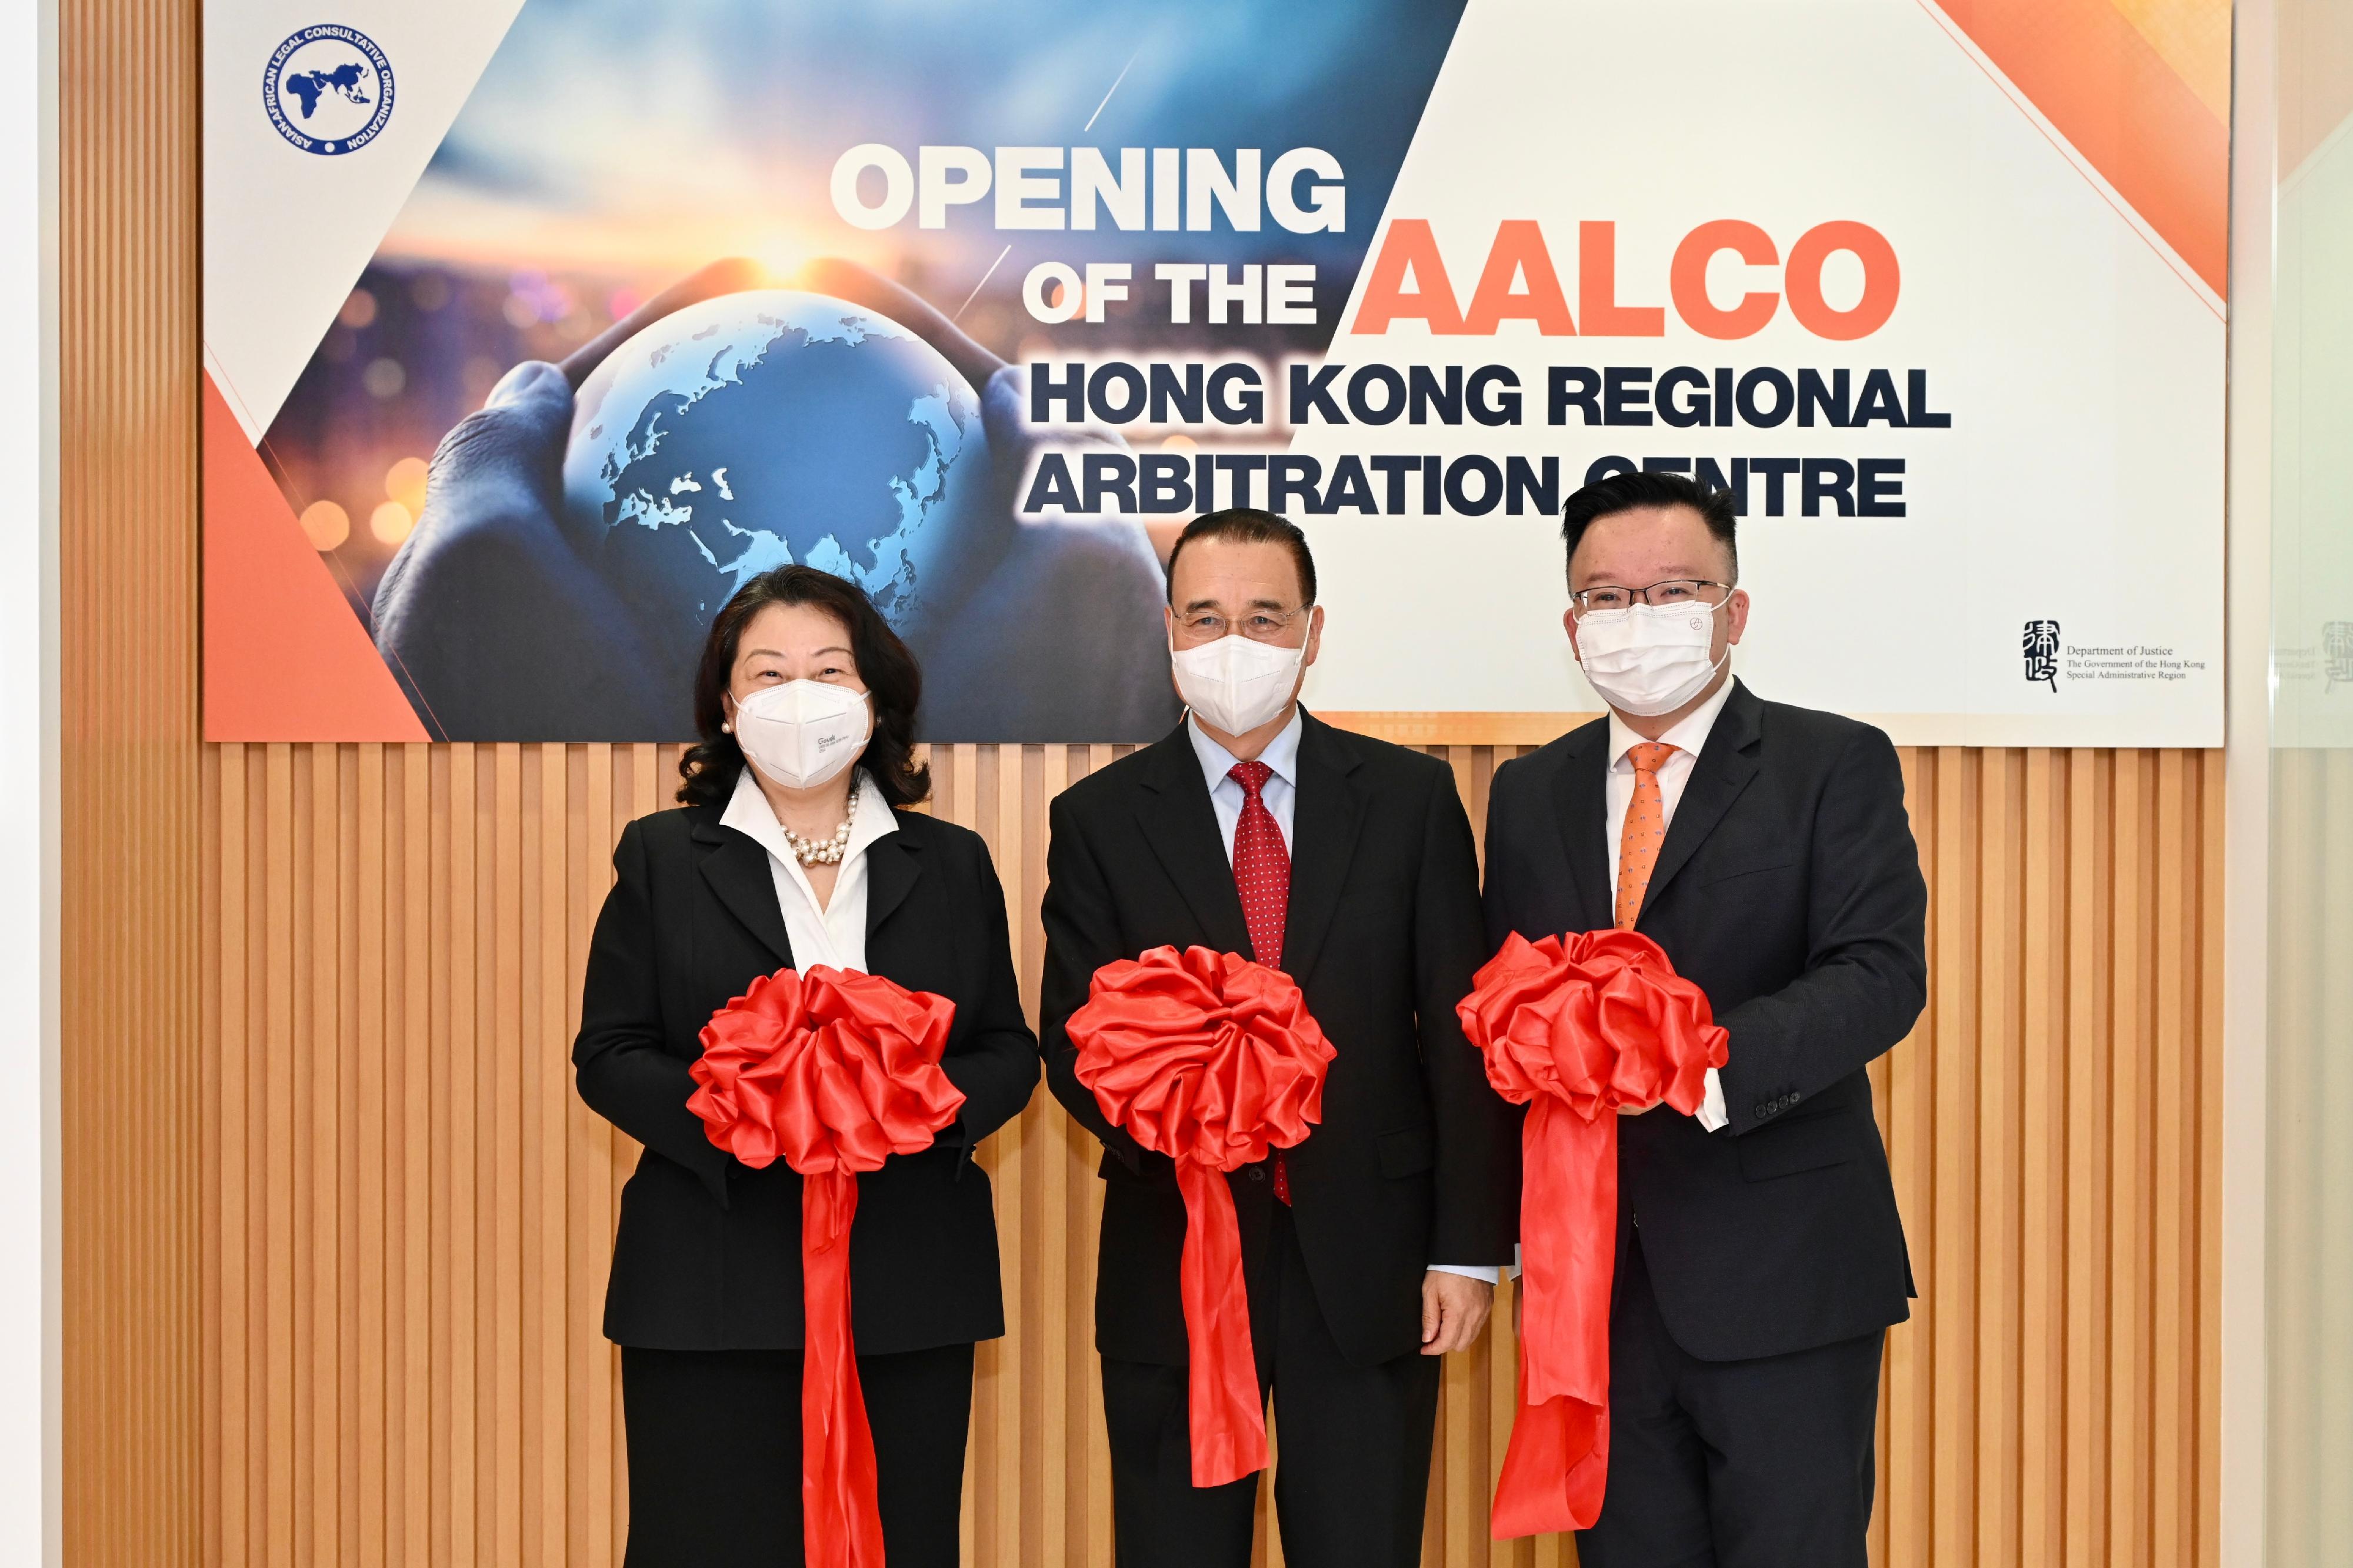 The AALCO Hong Kong Regional Arbitration Centre was officially opened today (May 25). Photo shows (from left) the Secretary for Justice, Ms Teresa Cheng, SC; the Commissioner of the Ministry of Foreign Affairs in the Hong Kong Special Administrative Region, Mr Liu Guangyuan; and the Director of the AALCO Hong Kong Regional Arbitration Centre, Mr Nick Chan, officiating at the opening ceremony.